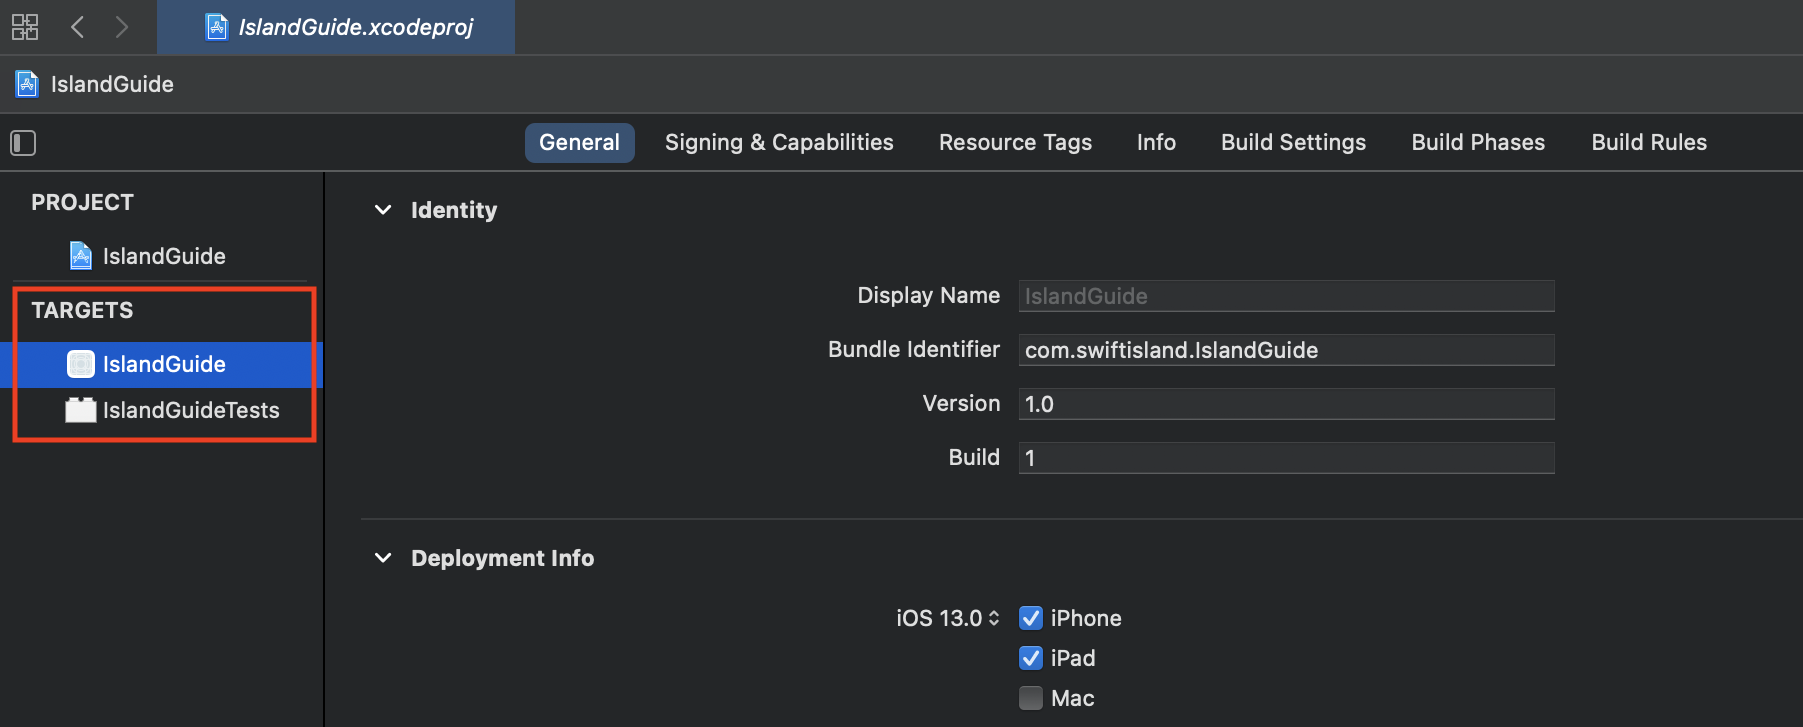 Targets in Xcode projects